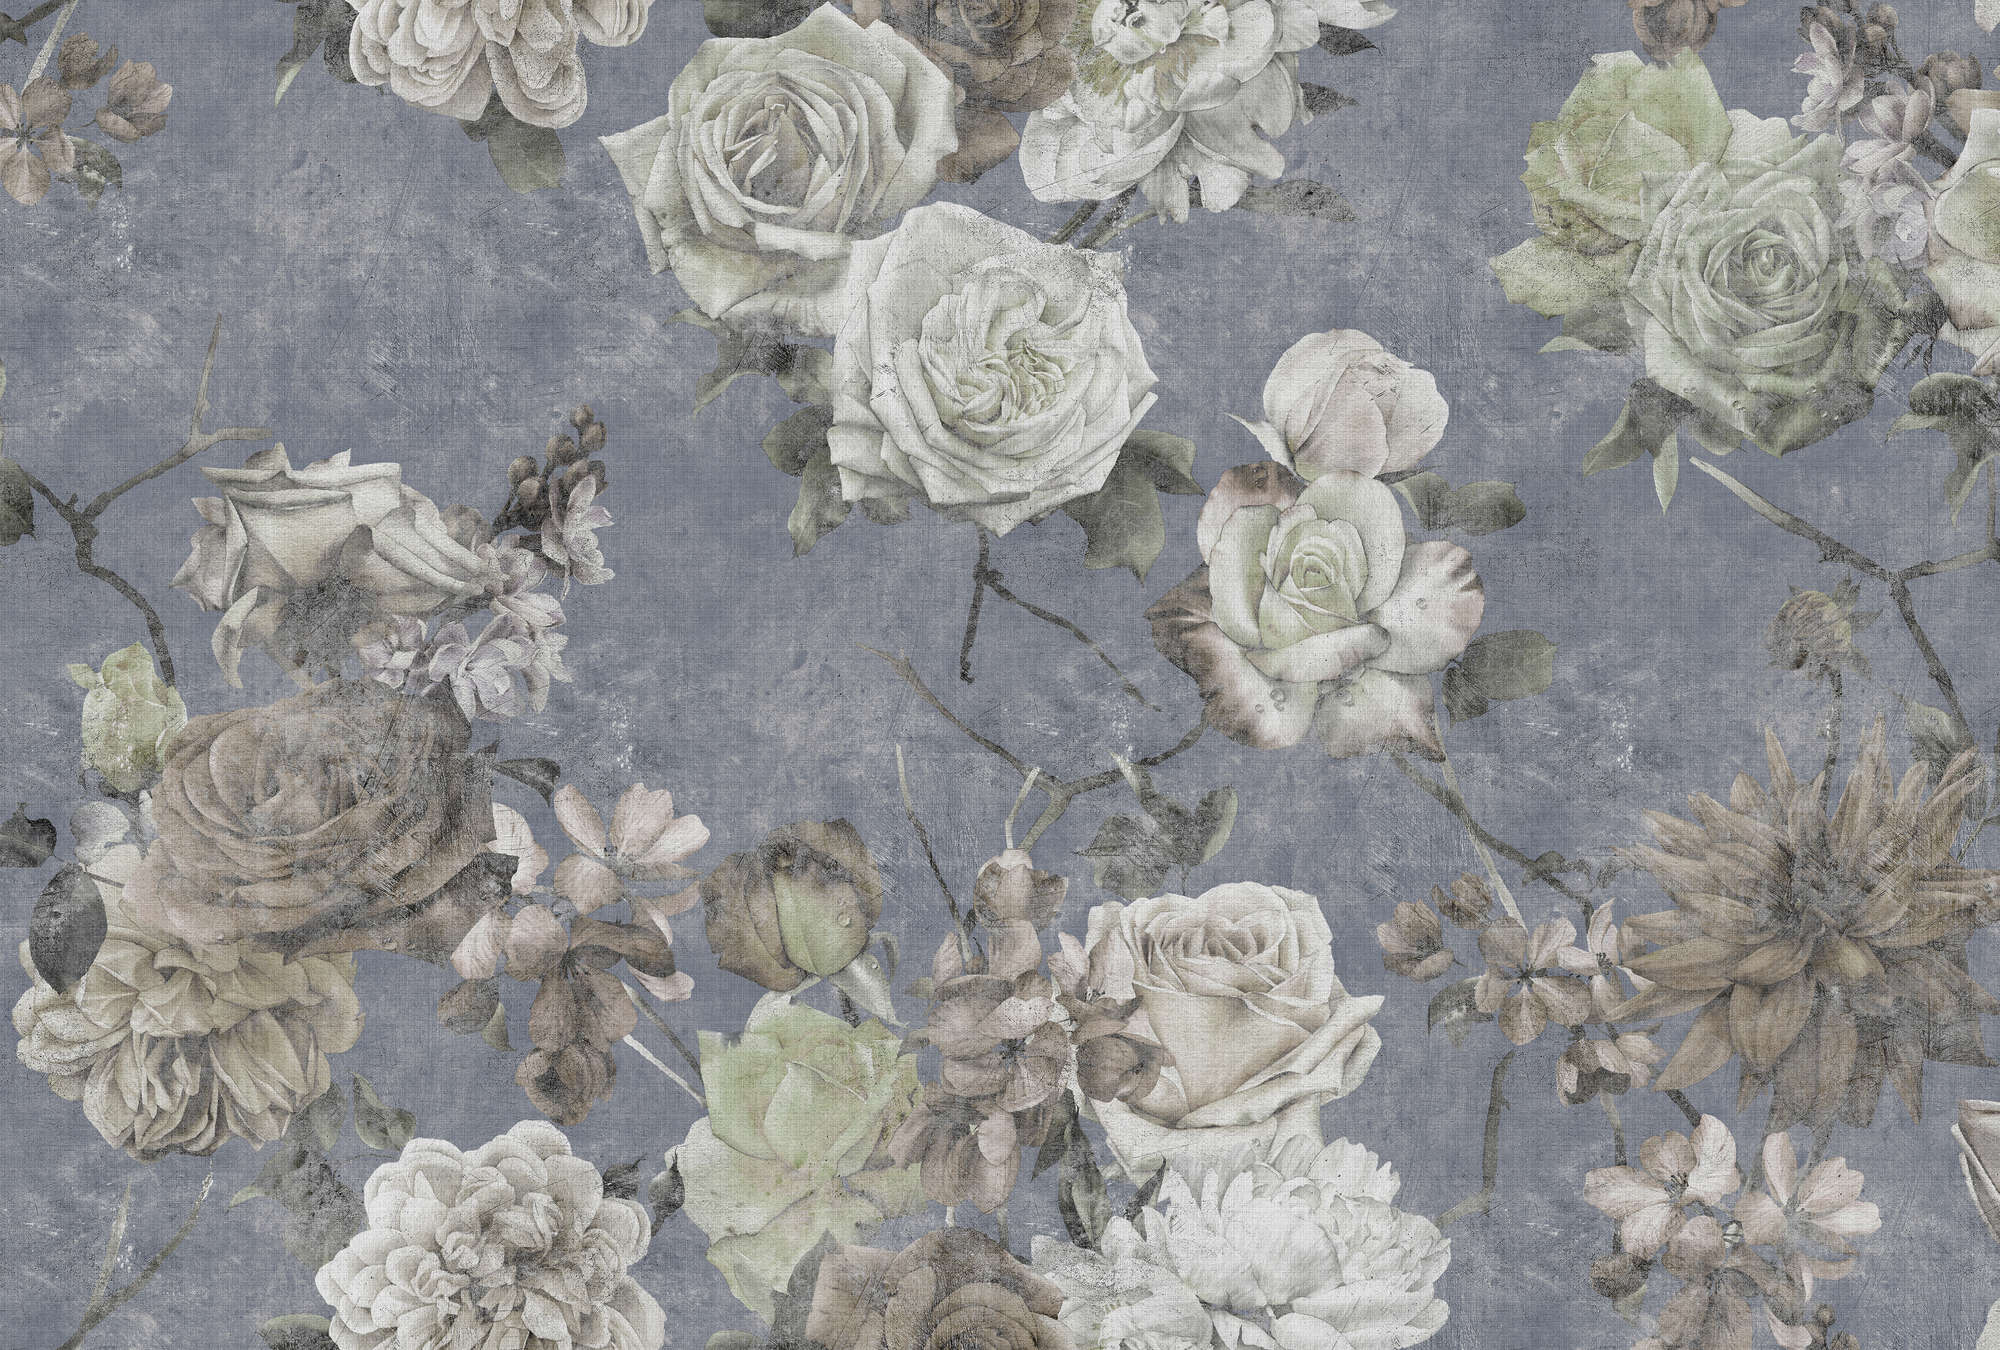             Sleeping Beauty 3 - Rose wallpaper in vintage used look - natural linen structure - blue, white | pearl smooth fleece
        